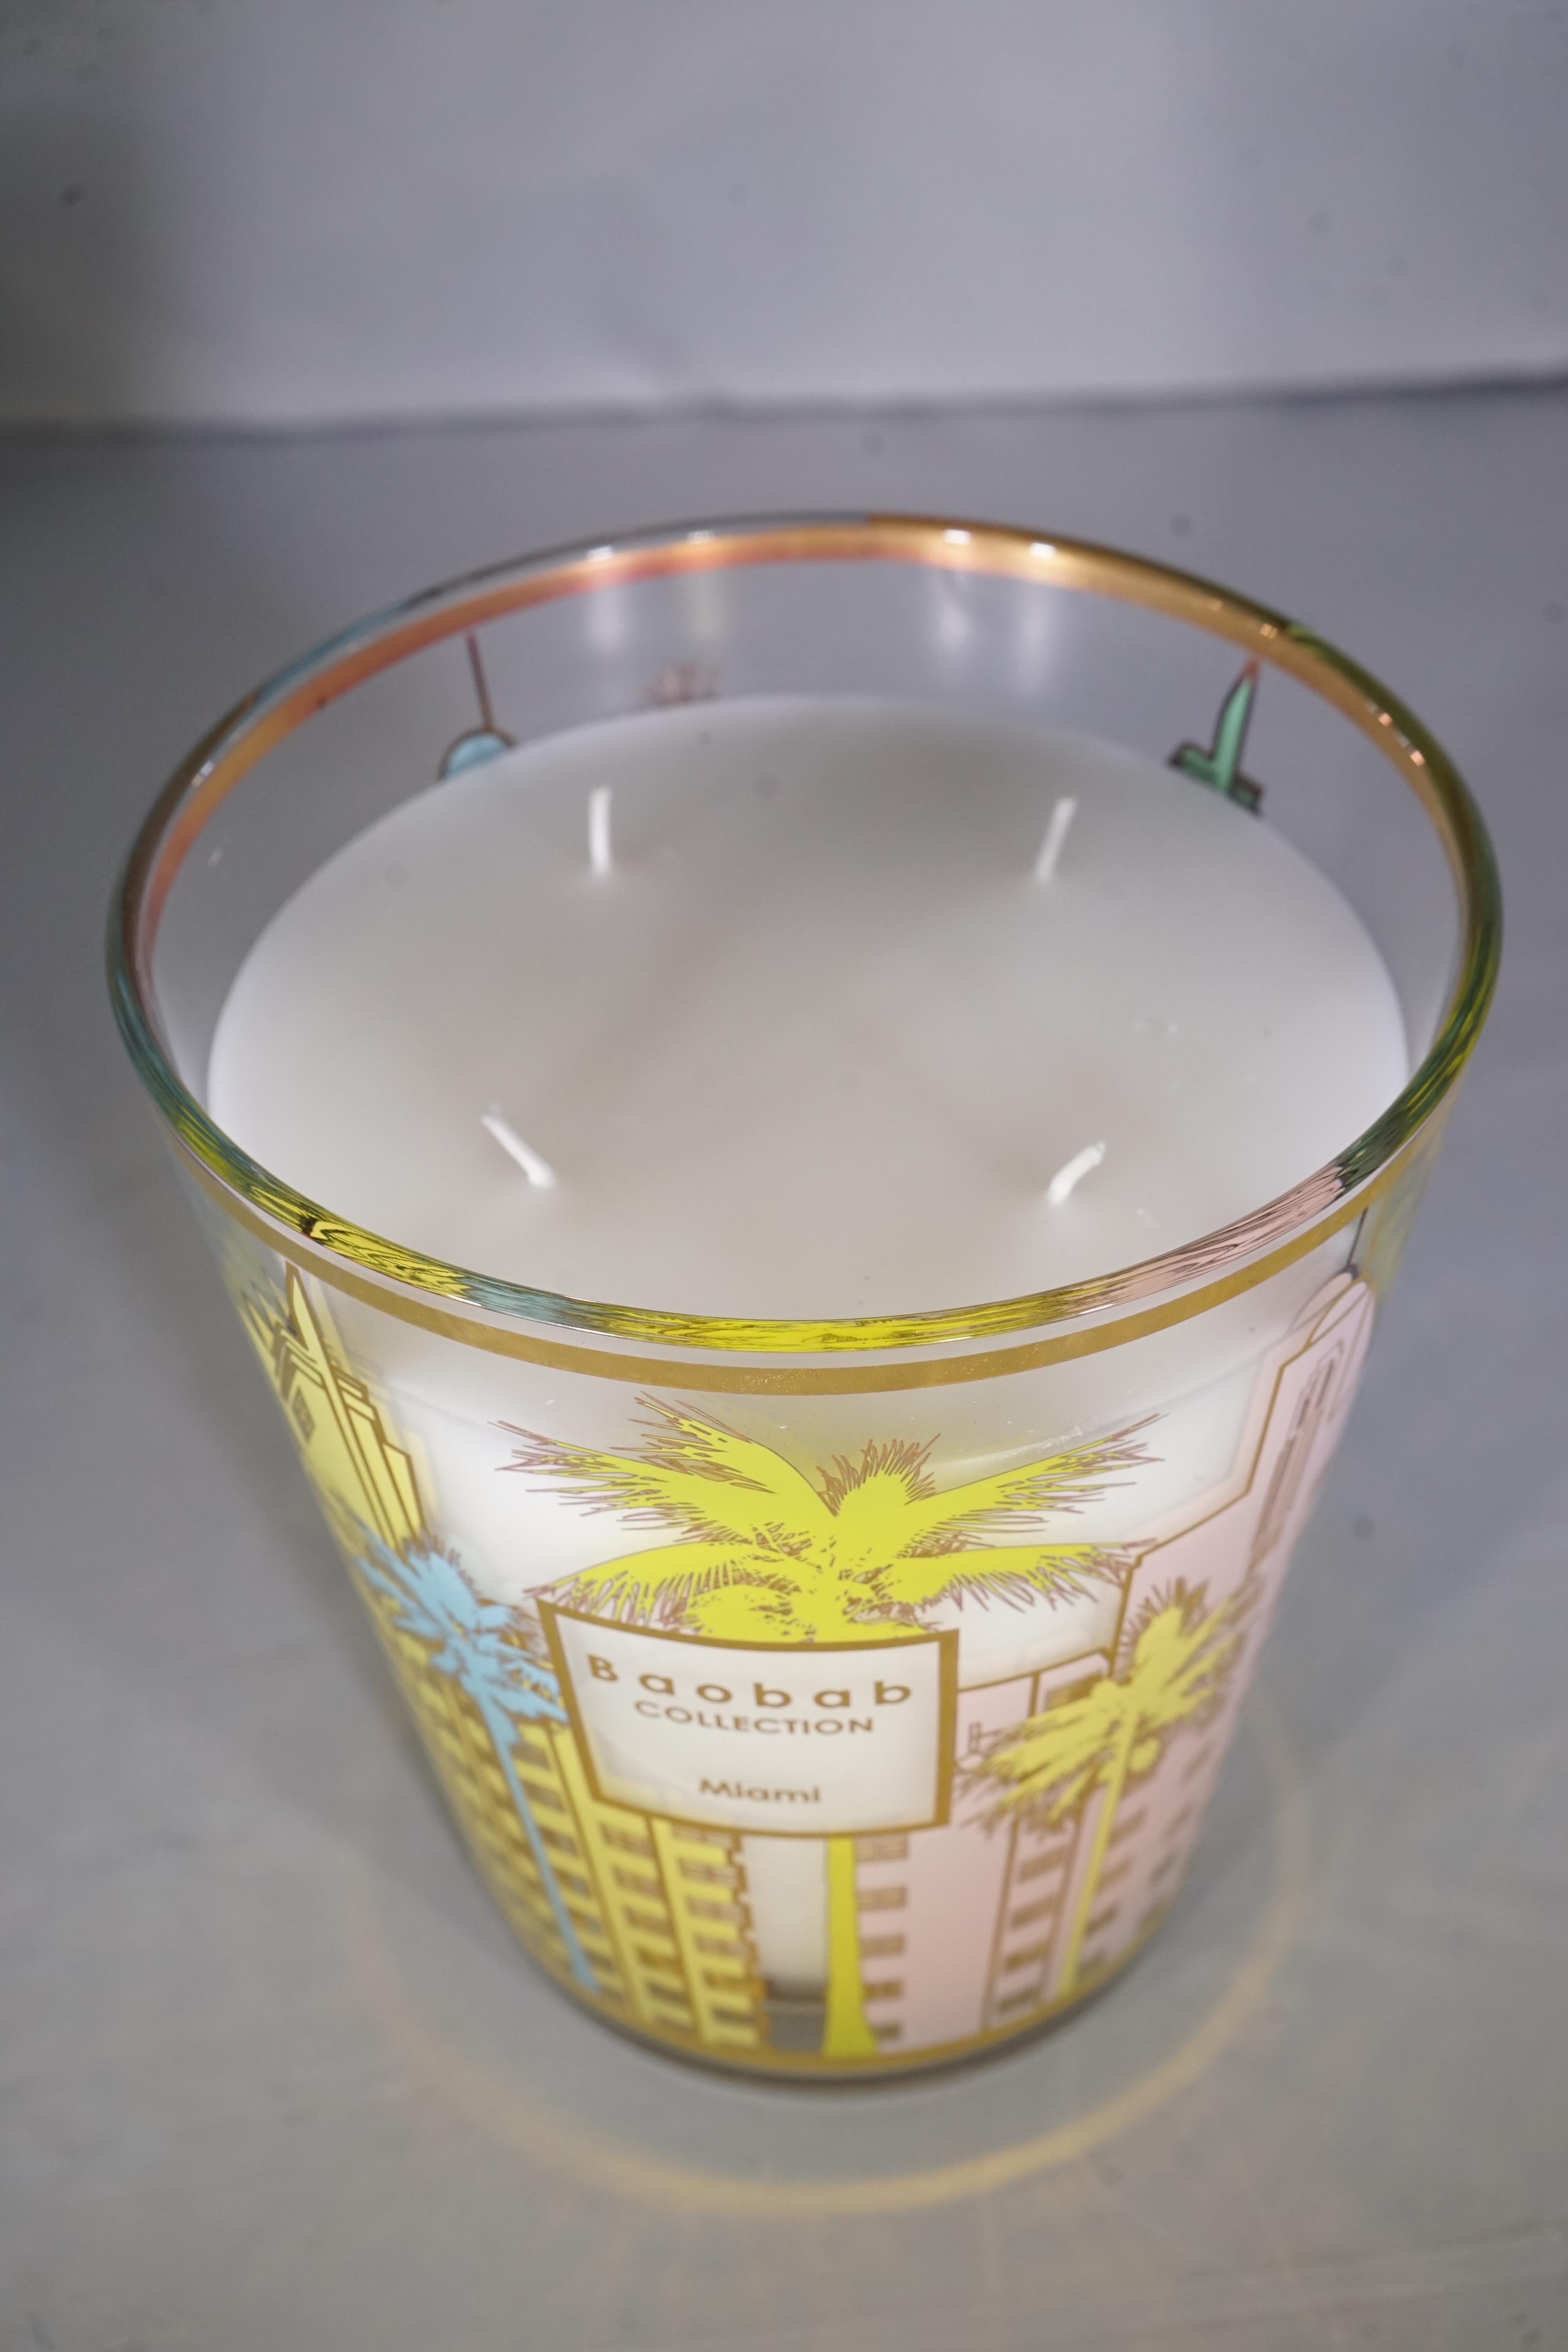 Glass Contemporary Baobab Collection Luxury Scented Miami Medium Candle